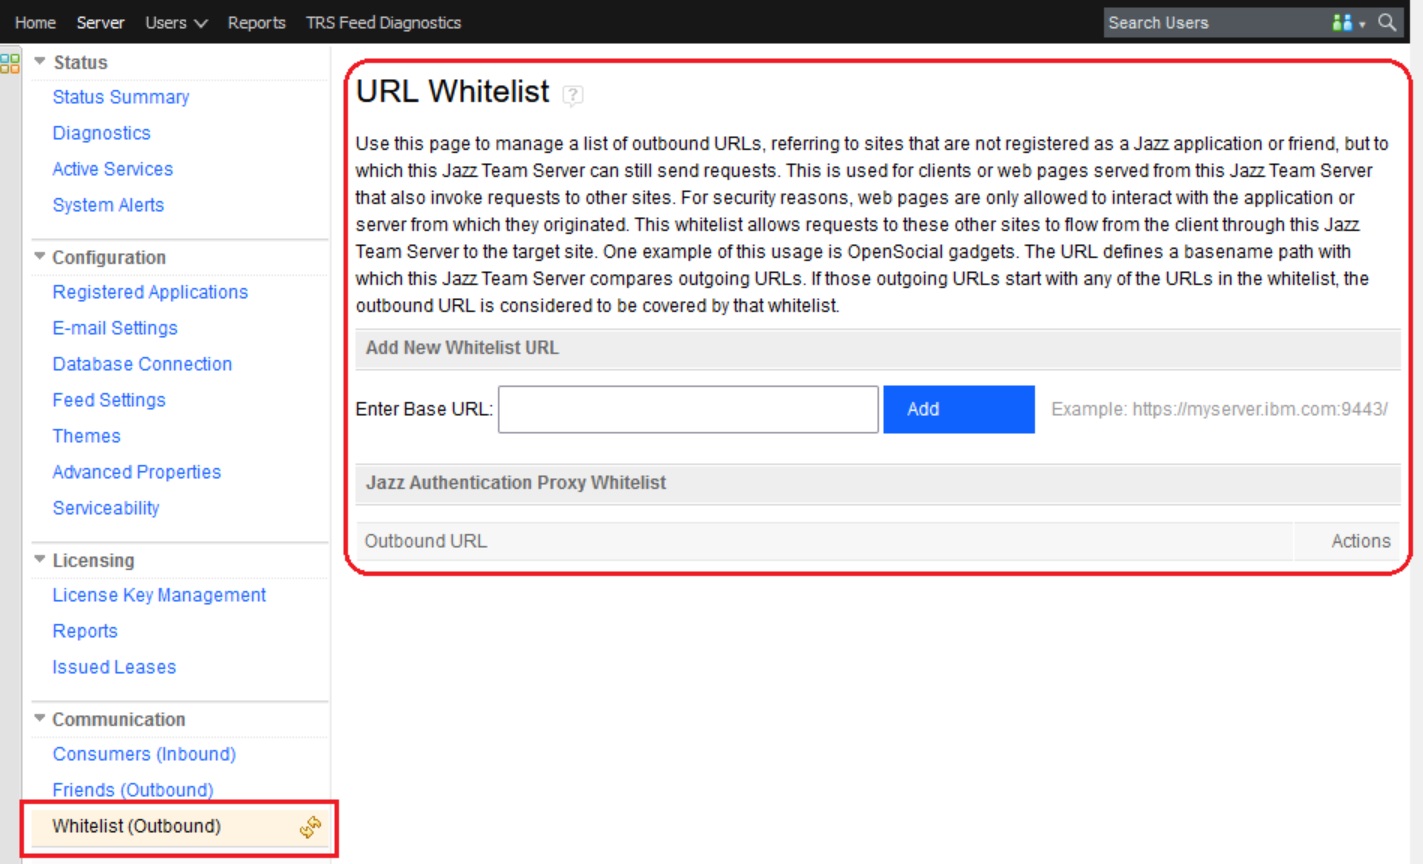 Whitelist is under Communication, you can whitelist a URL by entering the base URL